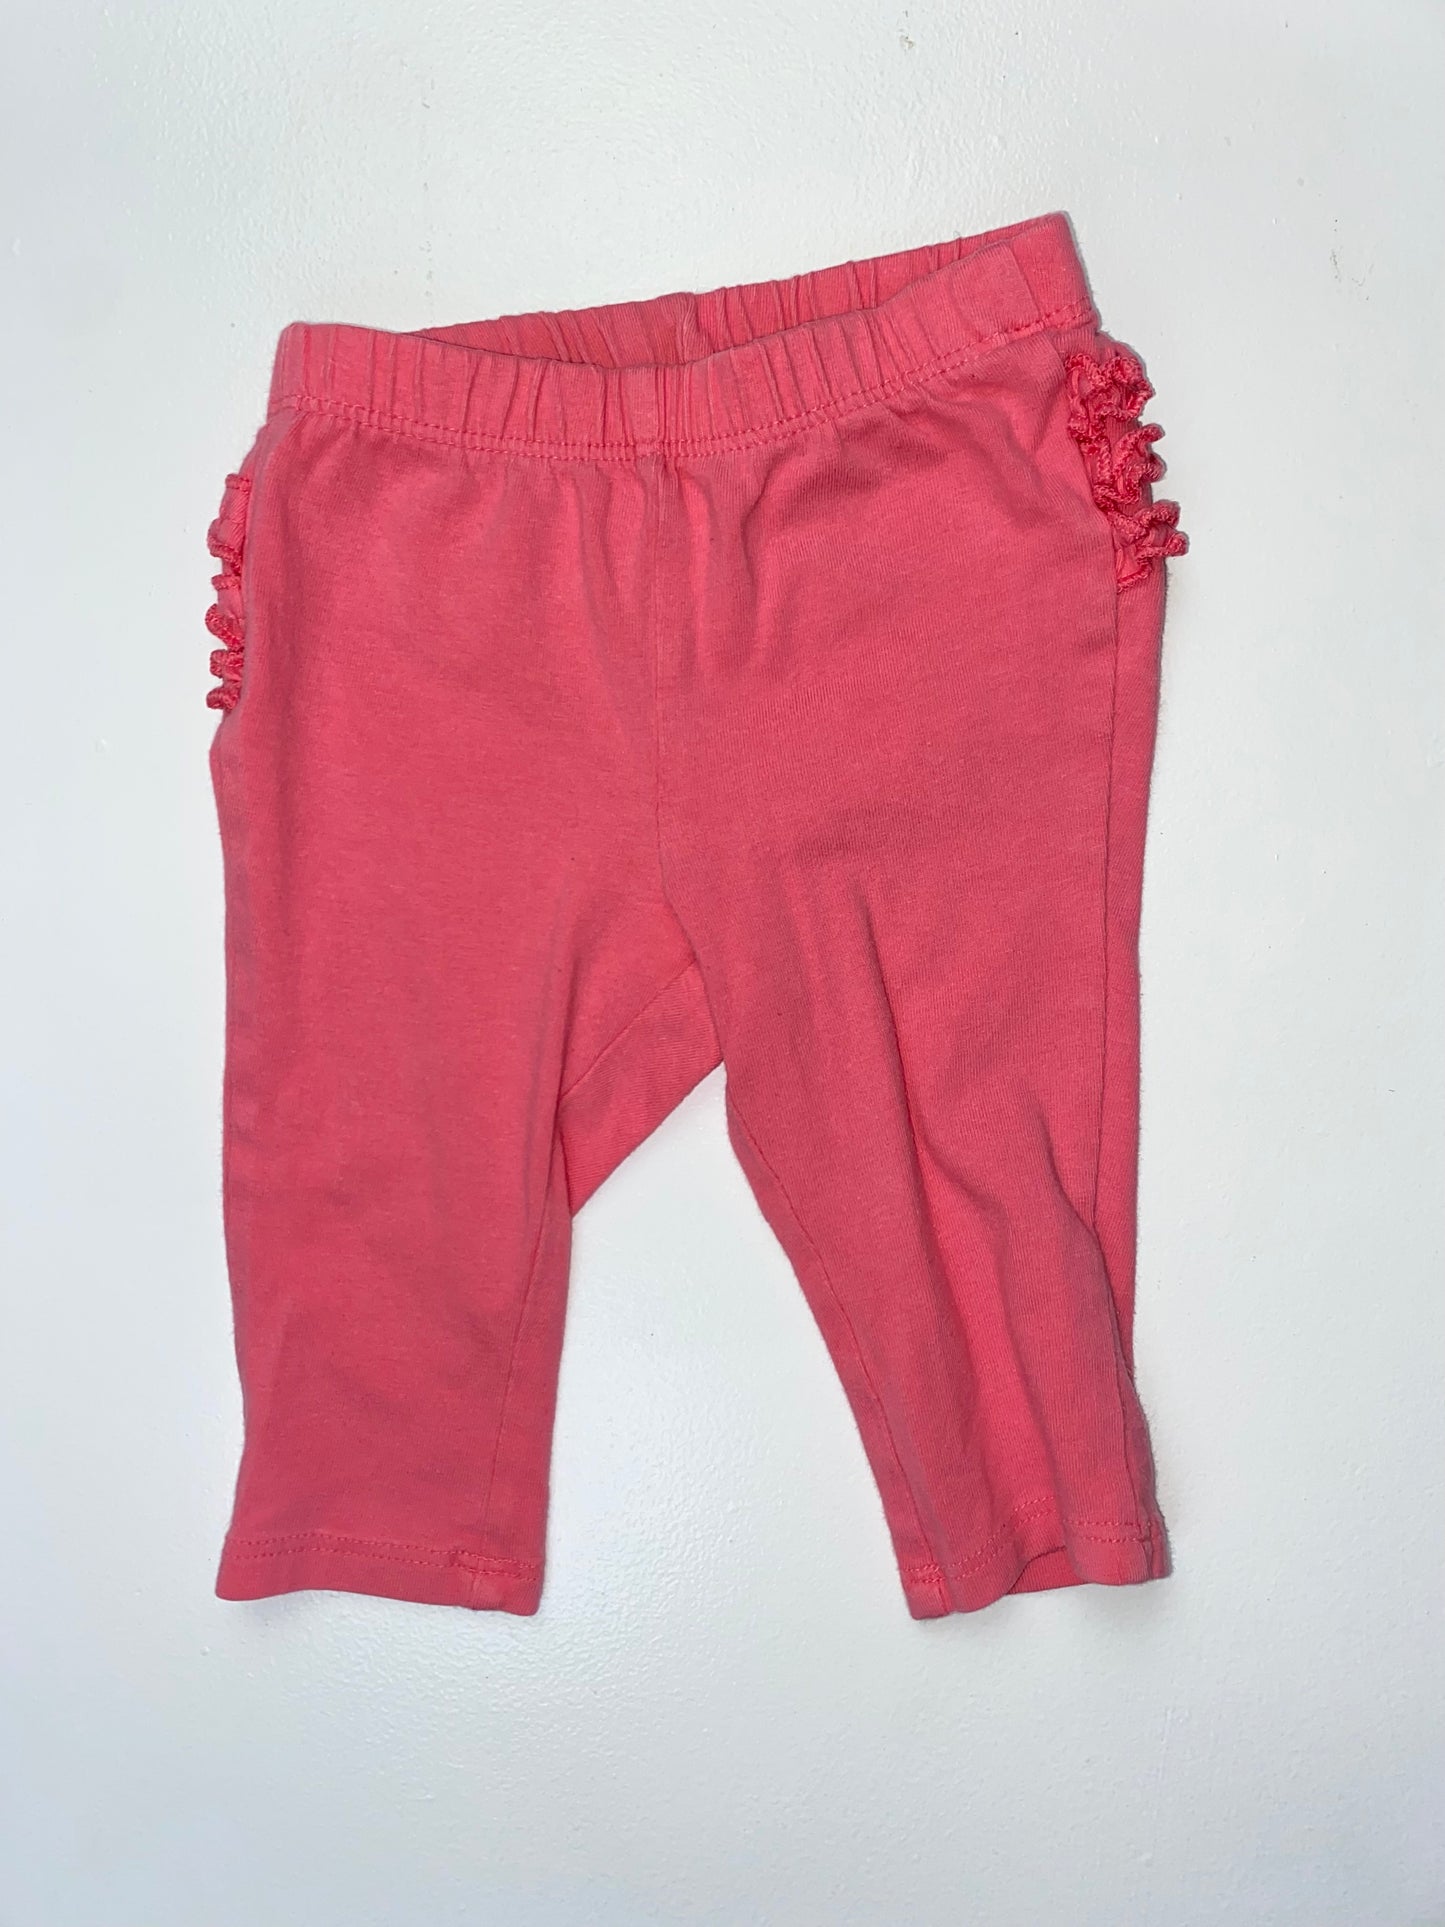 Old Navy Pink Pull-On Pants with Frilly Bum 3-6M